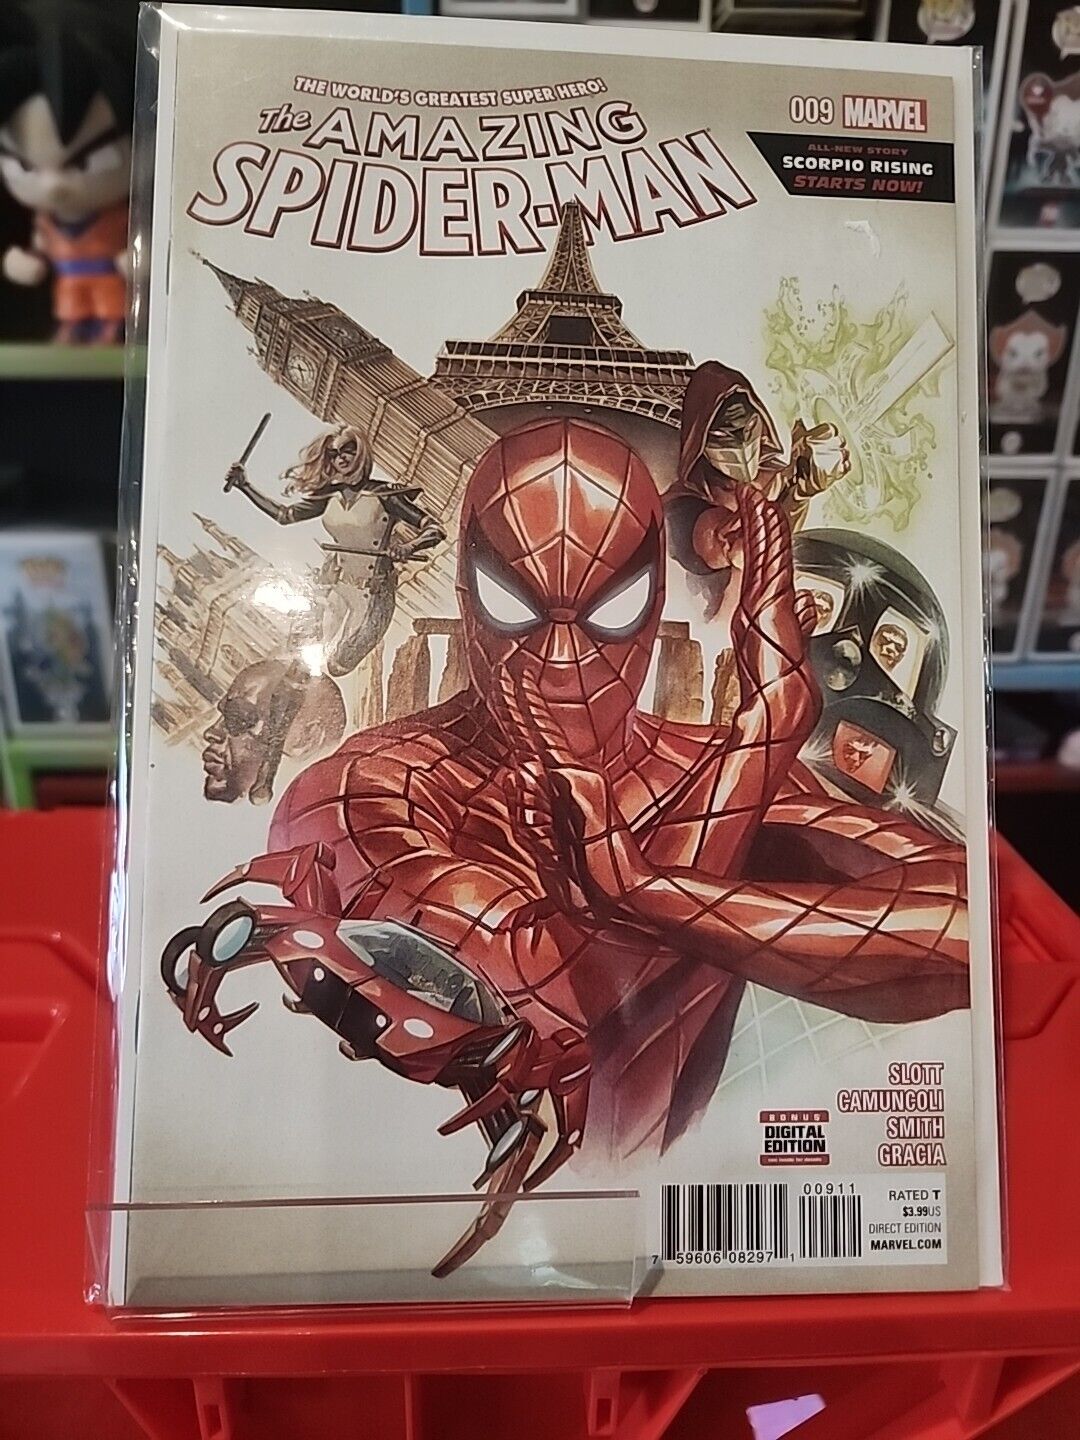 The amazing spider-man Issue 009 Nm+